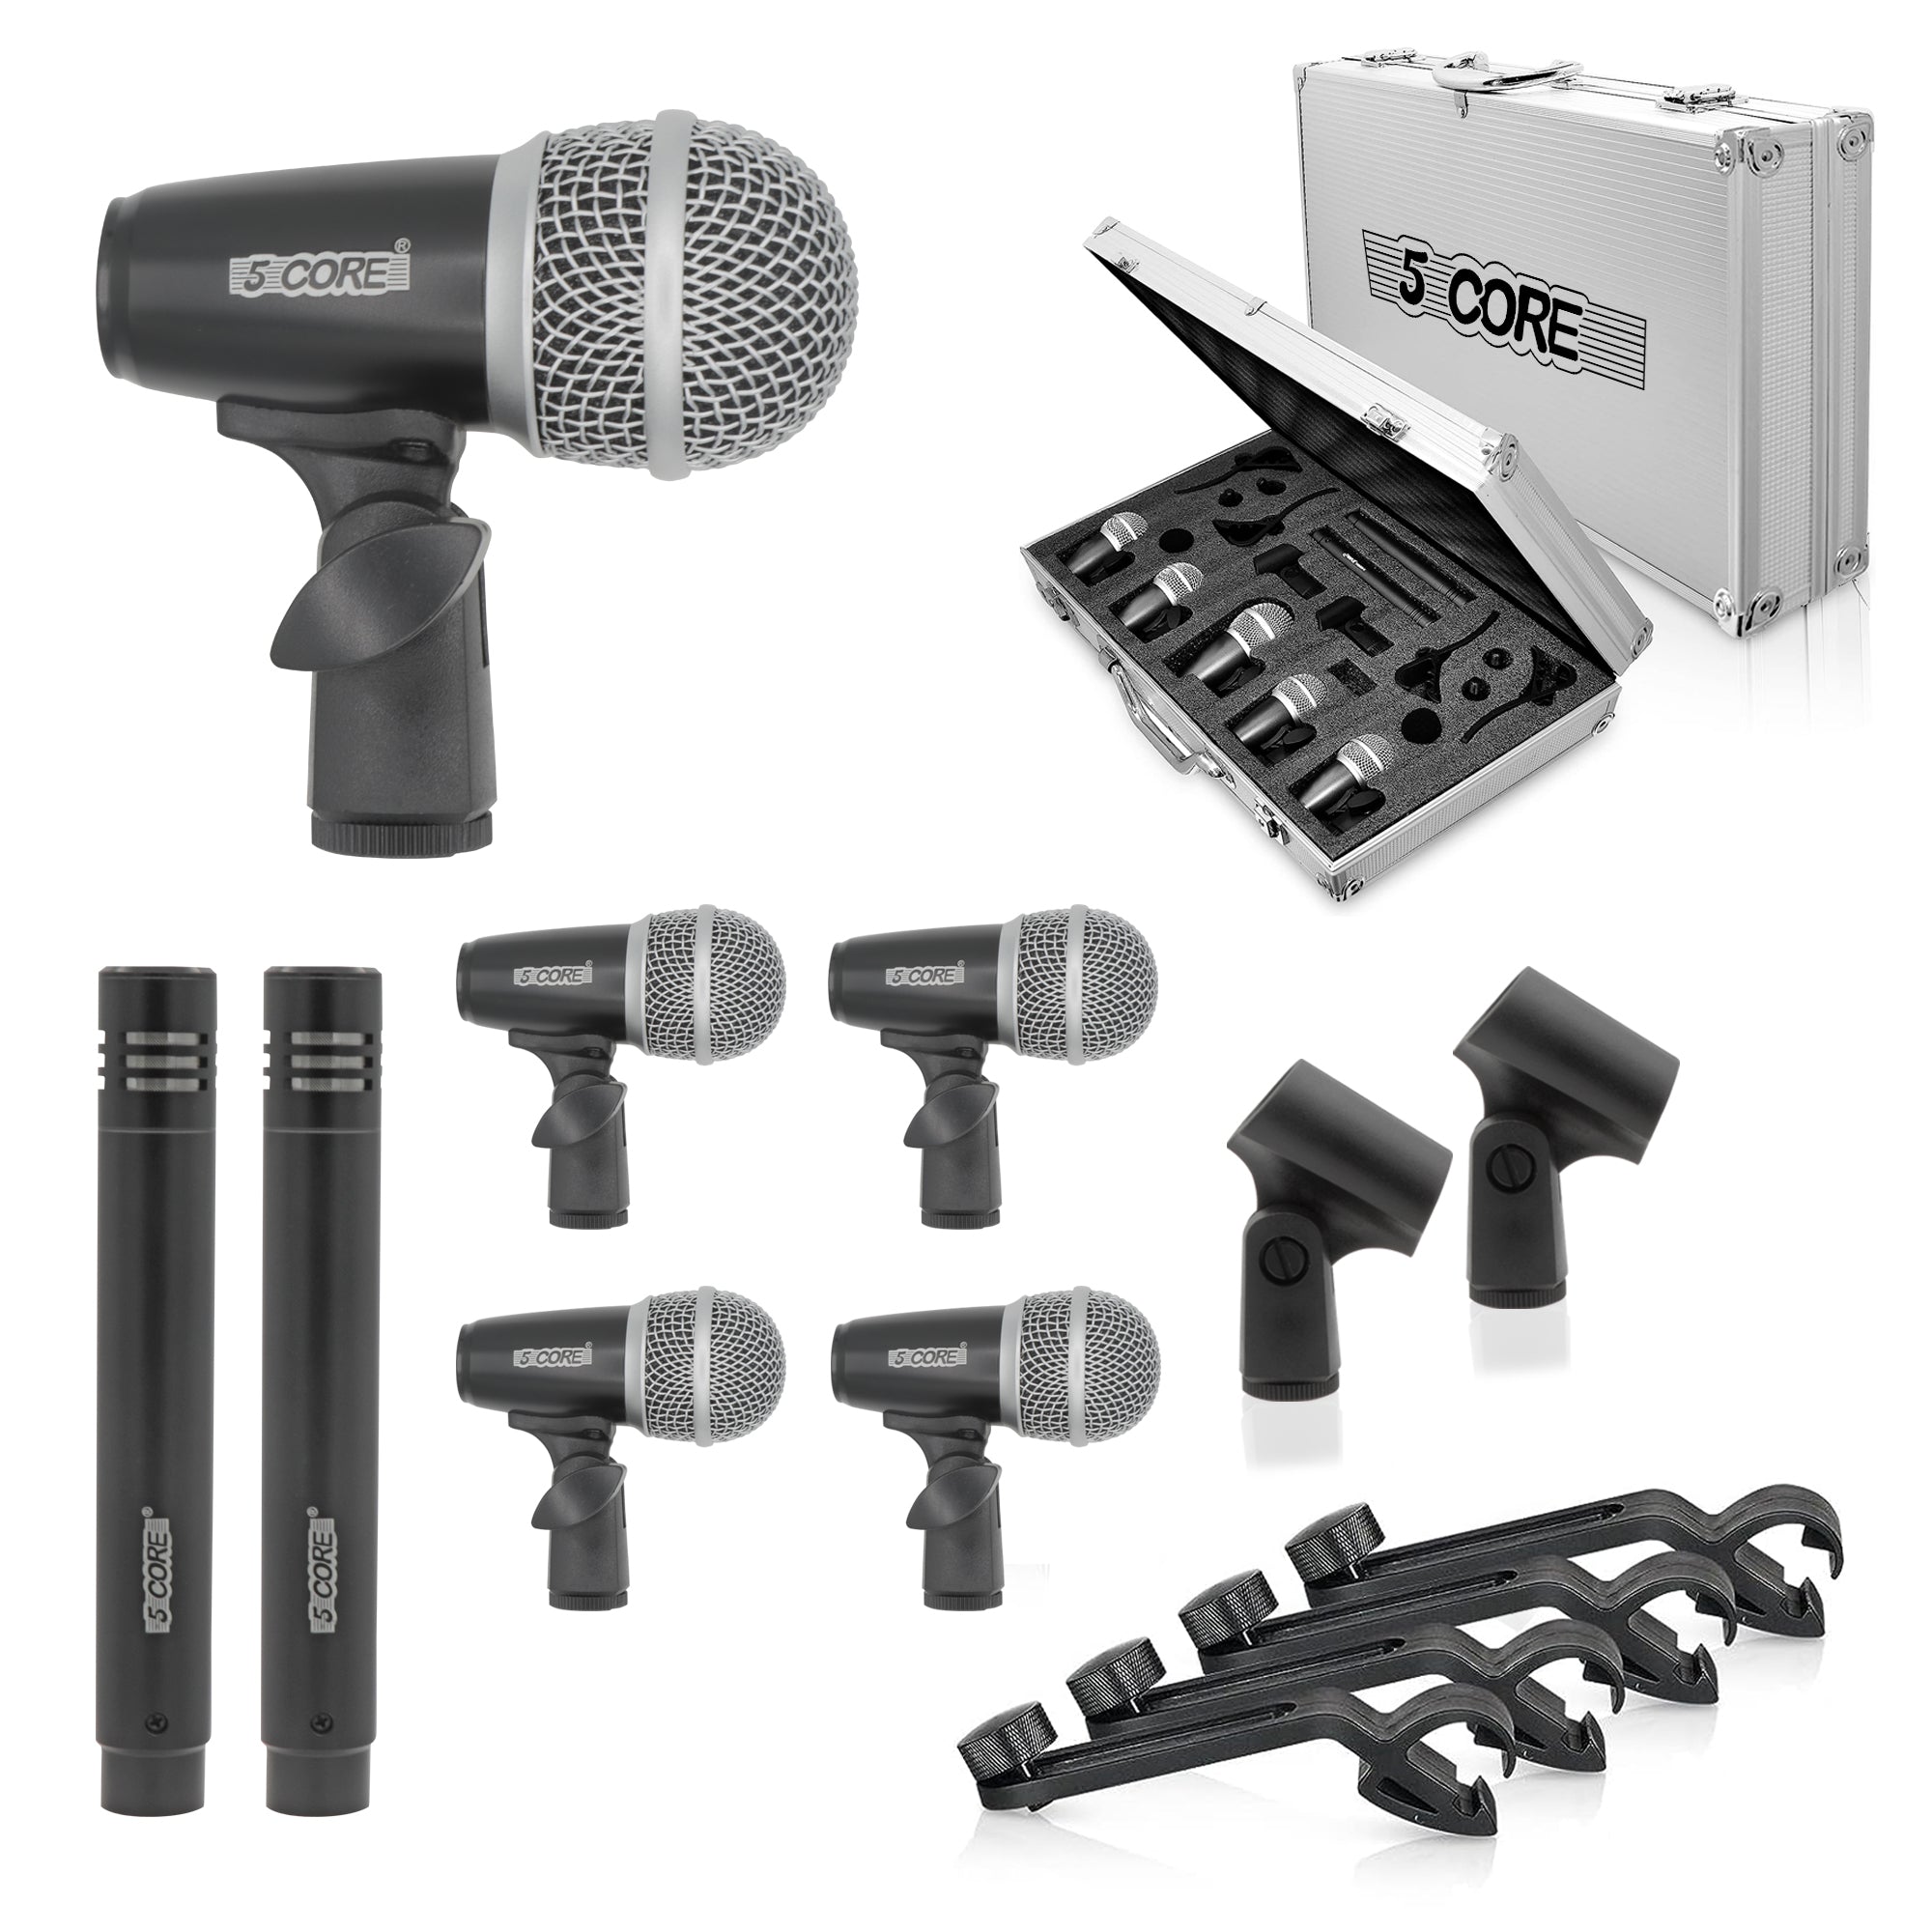 5 Core Drum Microphone Kit 7 Piece Wired Full Metal Dynamic Wired drums Mic Set for Drummers w/ Kick Bass Tom Snare + Silver Carrying Case Sponge & Thread Holder for Vocal & Instrument - DM 7RND BLK